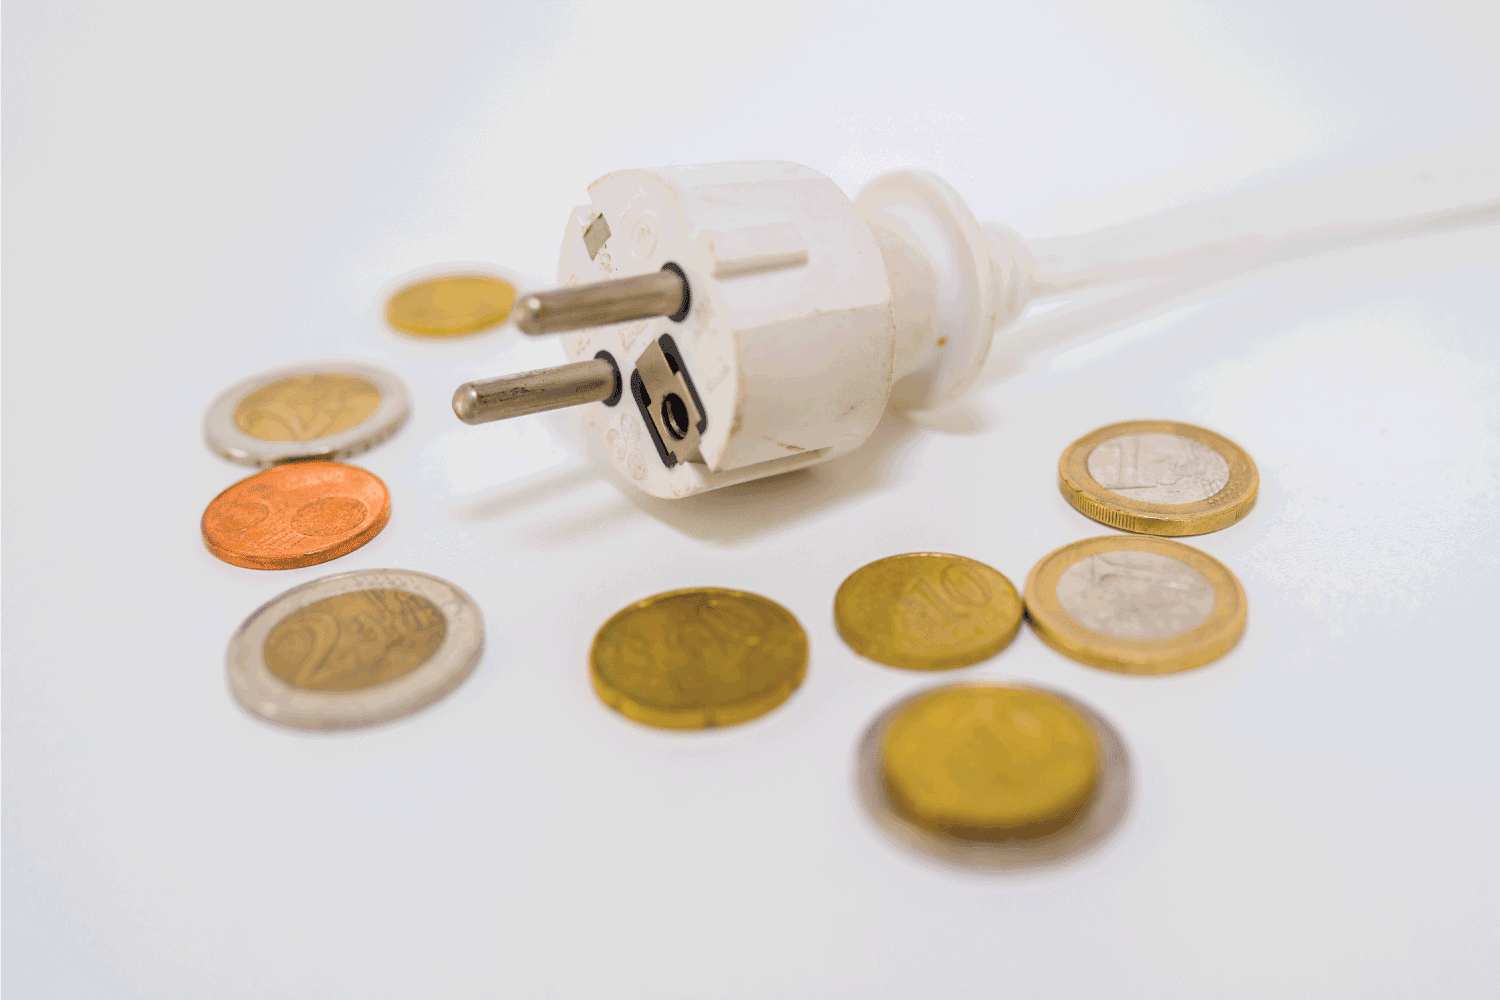 coins surrounding power cable plug, electricity costs concept